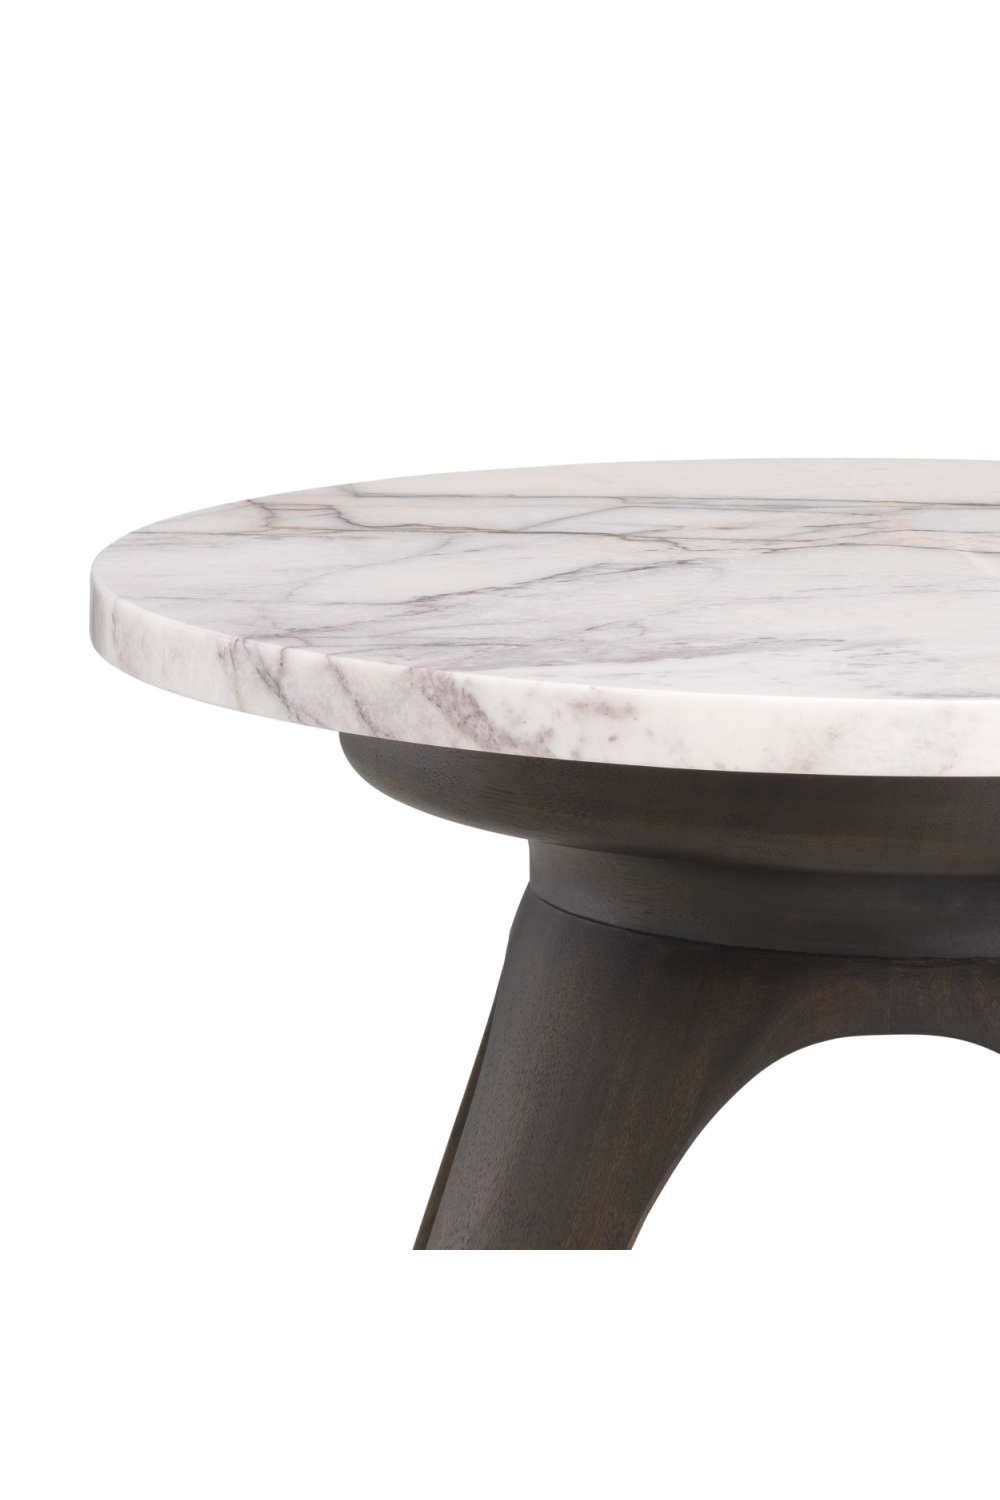 Tapered Legs Round Marble Side Table | Eichholtz Borre | Oroa.com